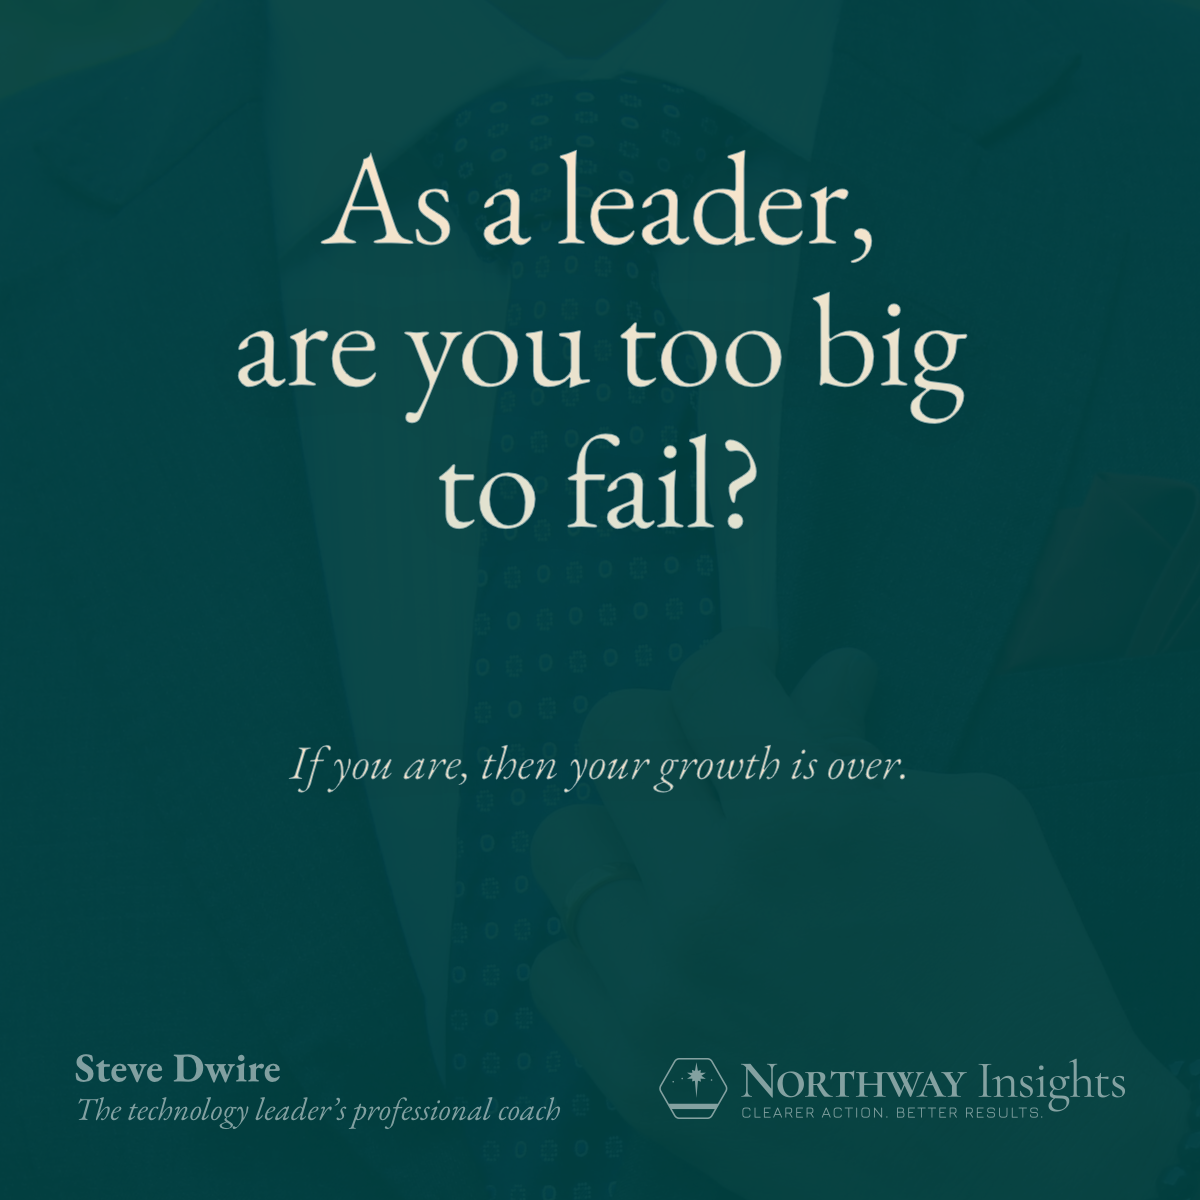 As a leader, are you too big to fail?